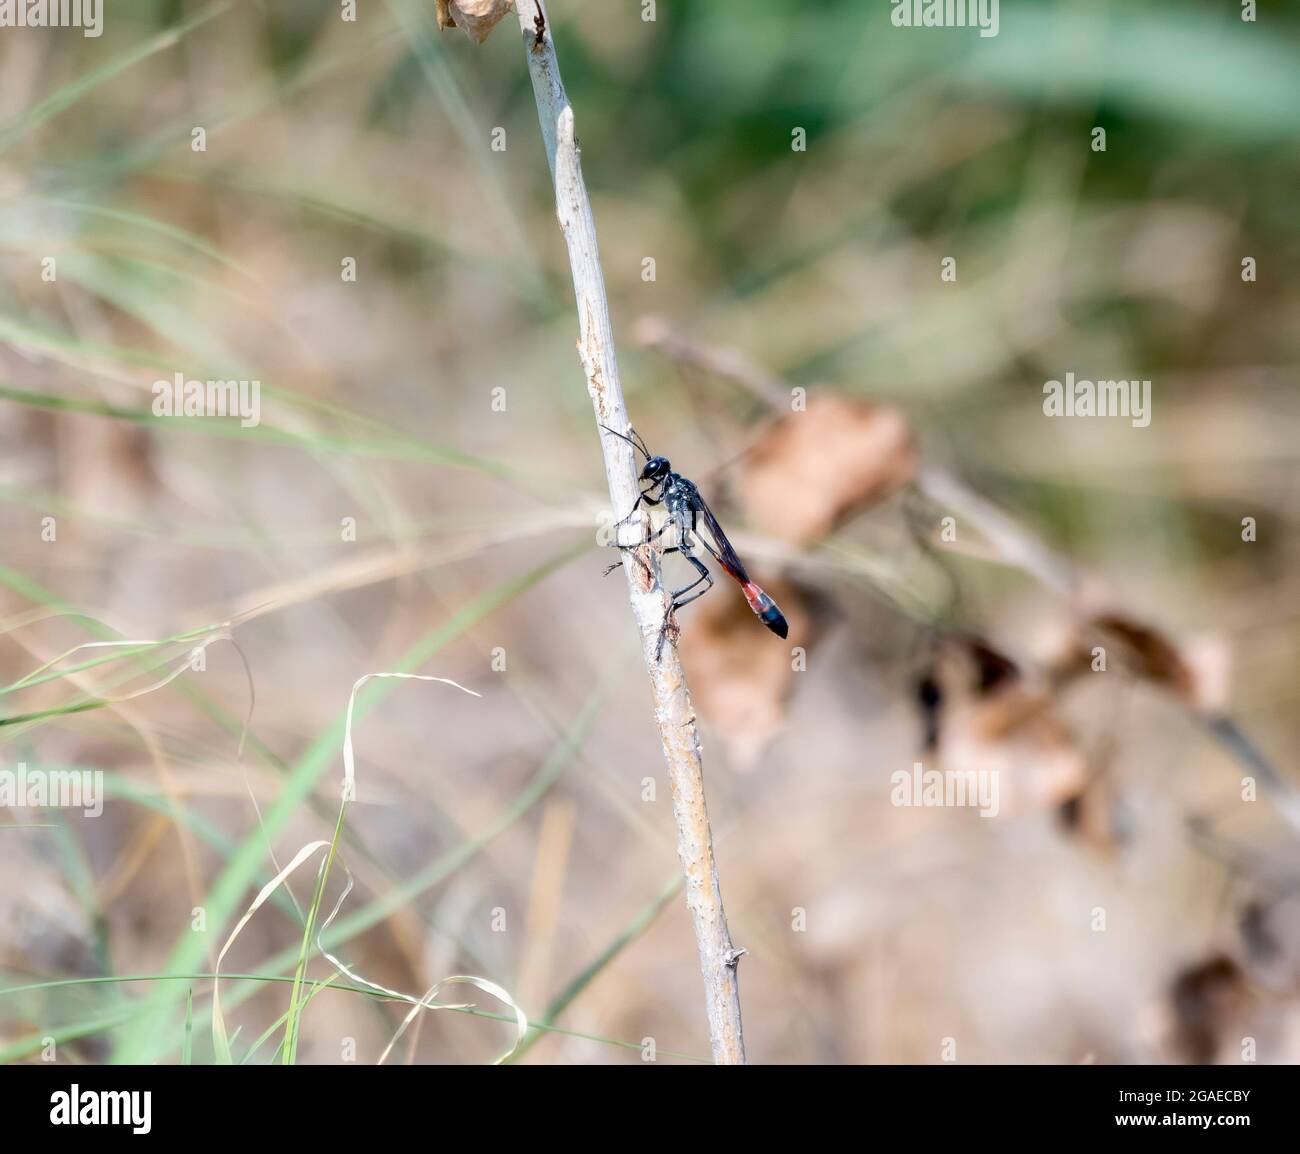 A Very Large Black and Red Thread-waisted Sand Wasp (Genus Ammophila) Perched on Dried Vegetation Stock Photo